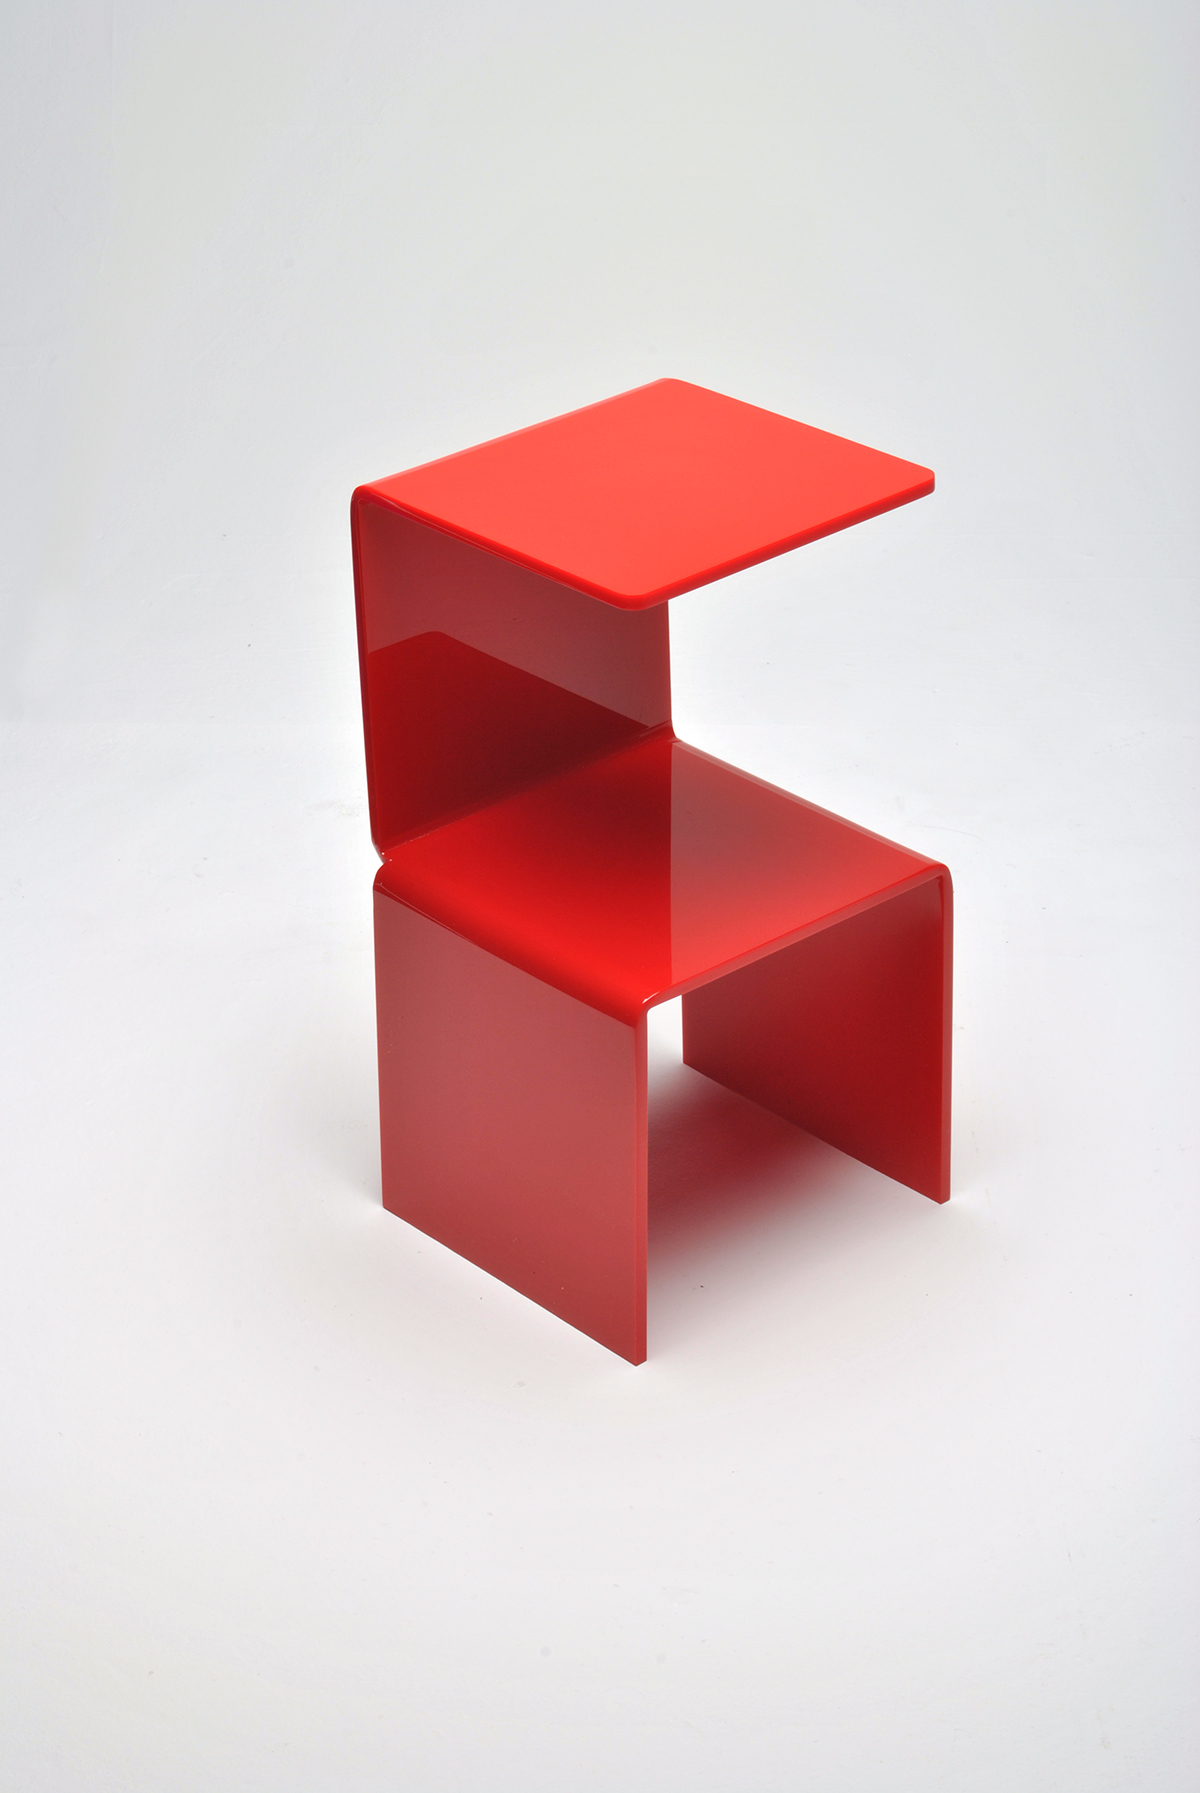 vermelha side table mesa lateral.hugo sigaud design red